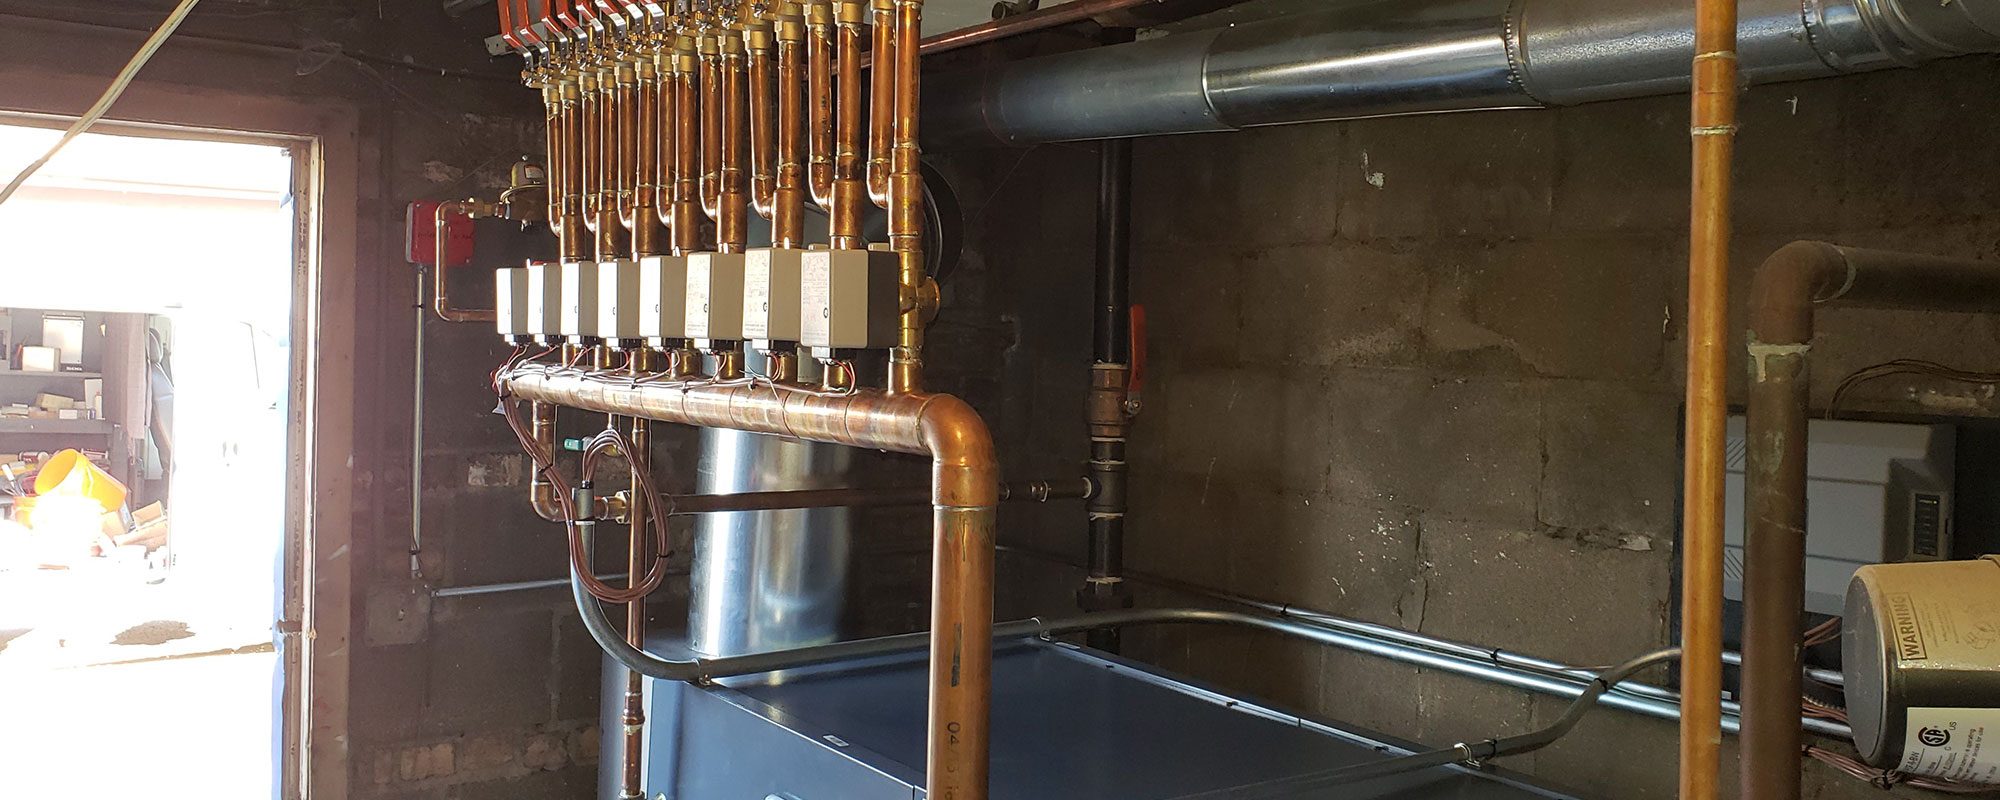 Boiler Unit and Manifold